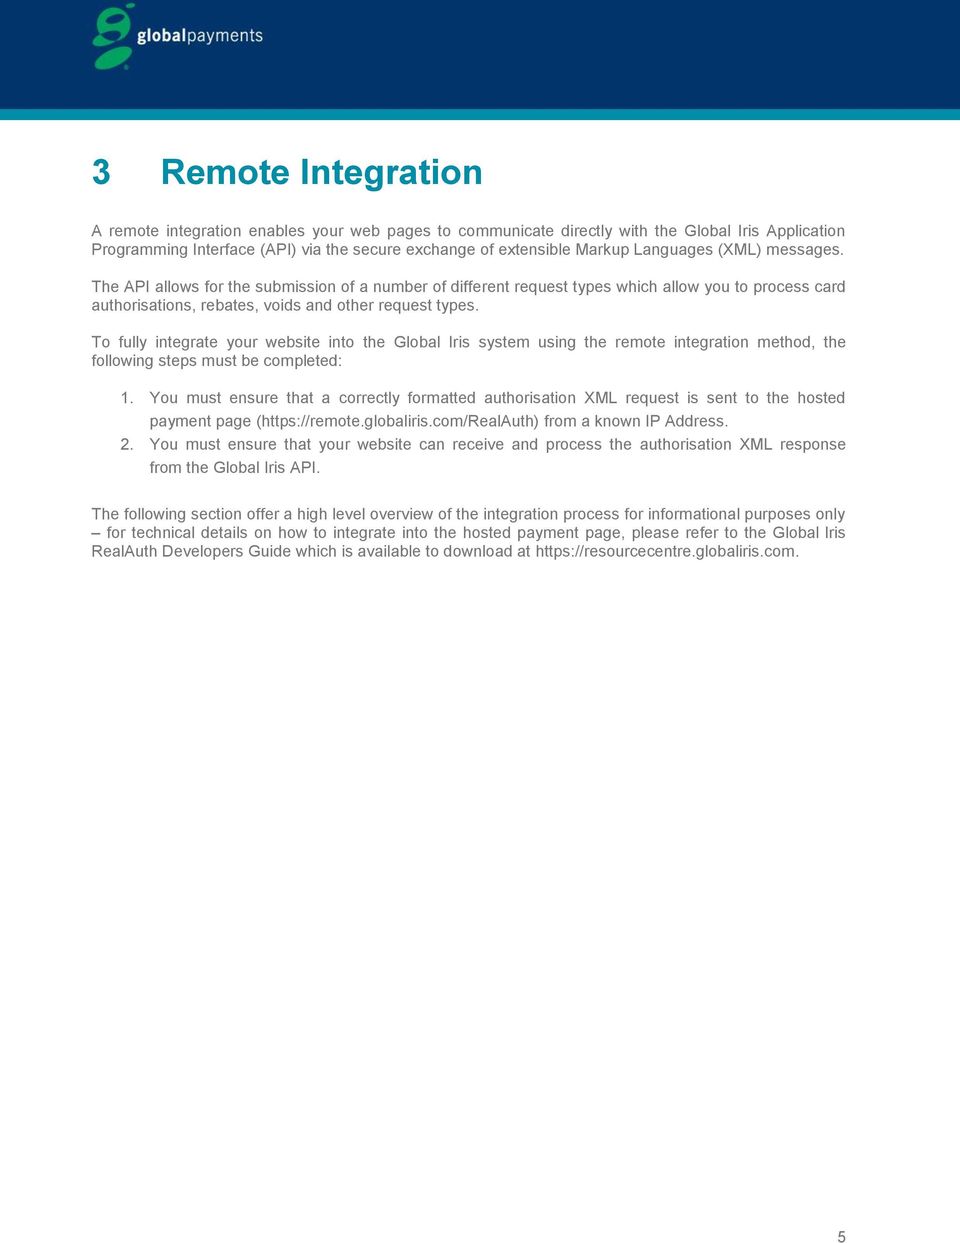 To fully integrate your website into the Global Iris system using the remote integration method, the following steps must be completed: 1.